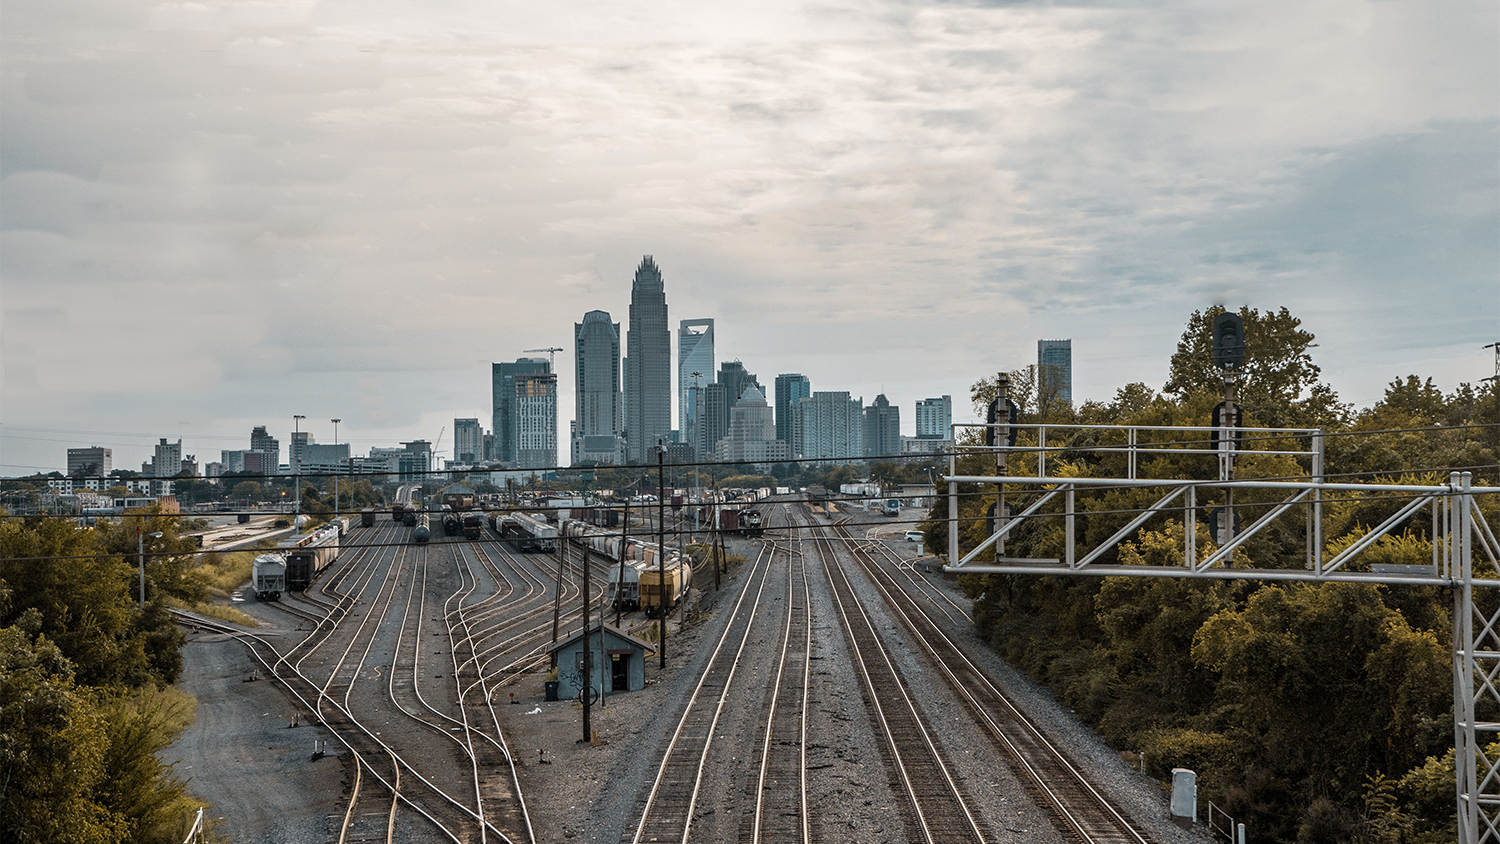 The city skyline of Charlotte looms over a rail yard with multiple train cars stored on several tracks